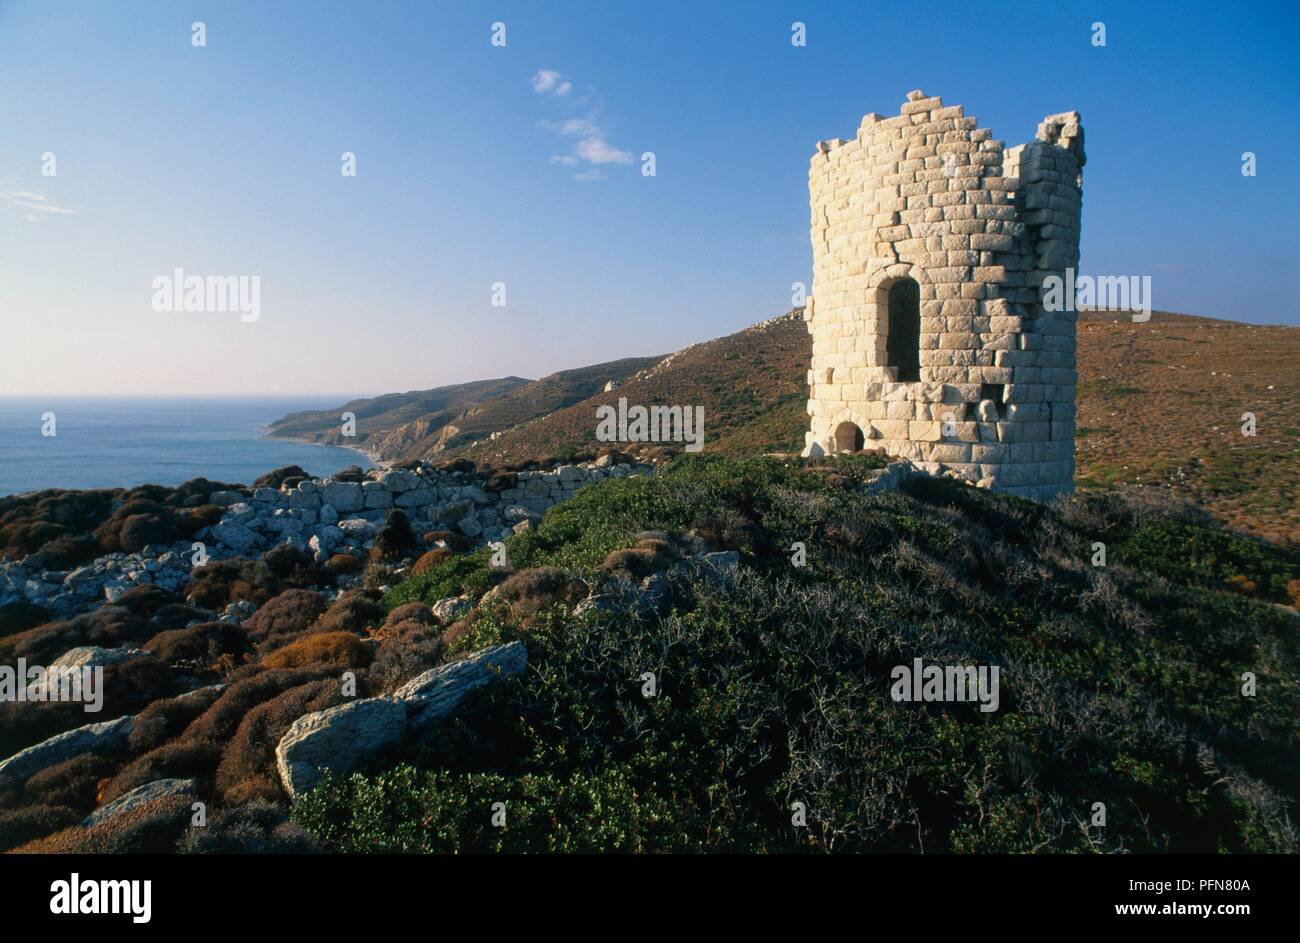 Greece, Chios, remains of Hellenistic town lookout tower on coastal cliff Stock Photo